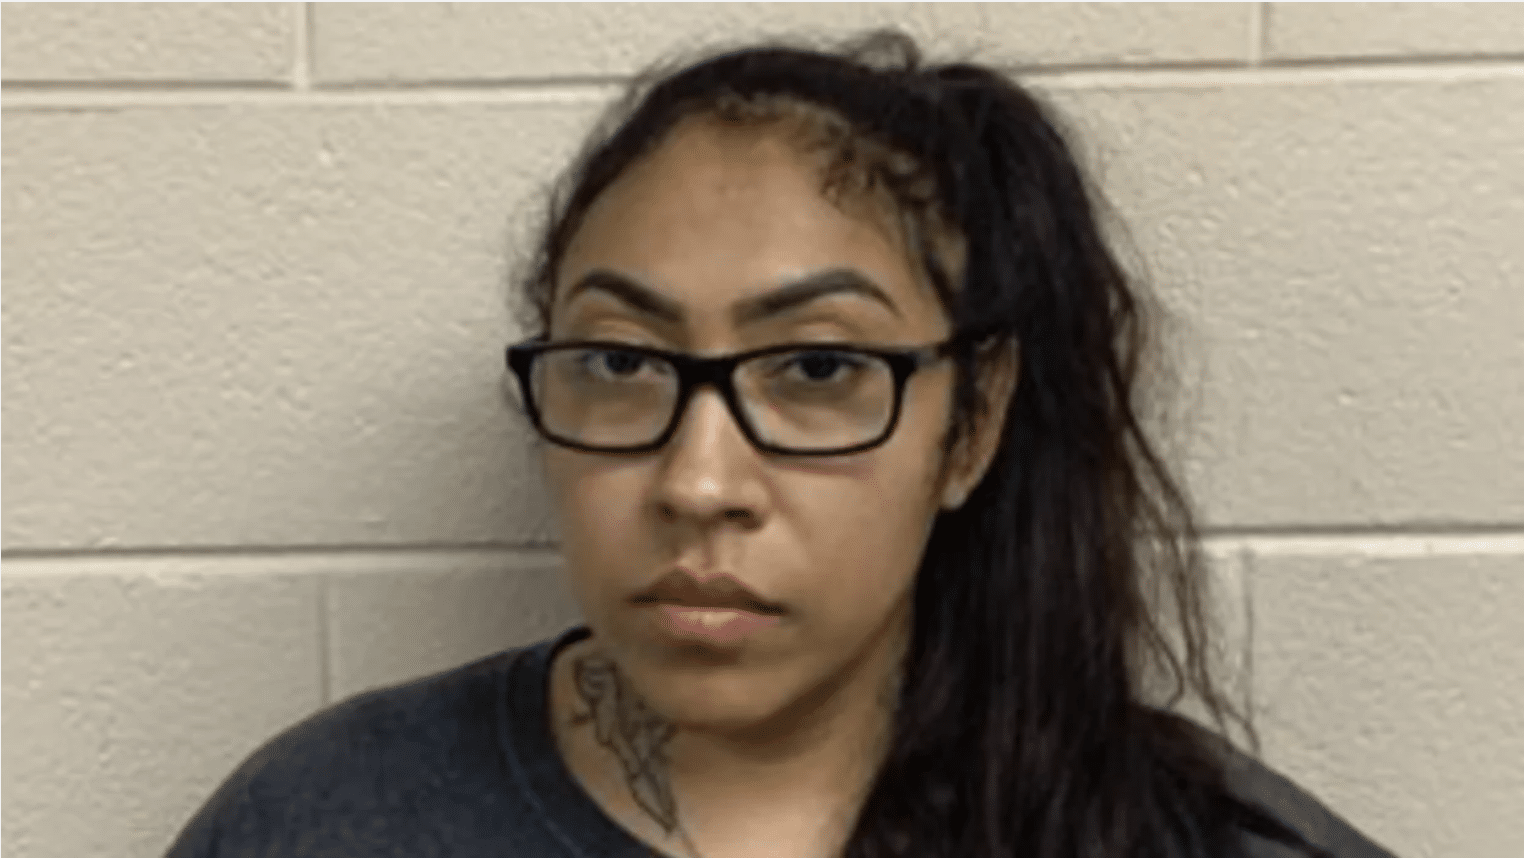 31-year-old woman impregnated by 13-year-old boy will not face any additional jail time